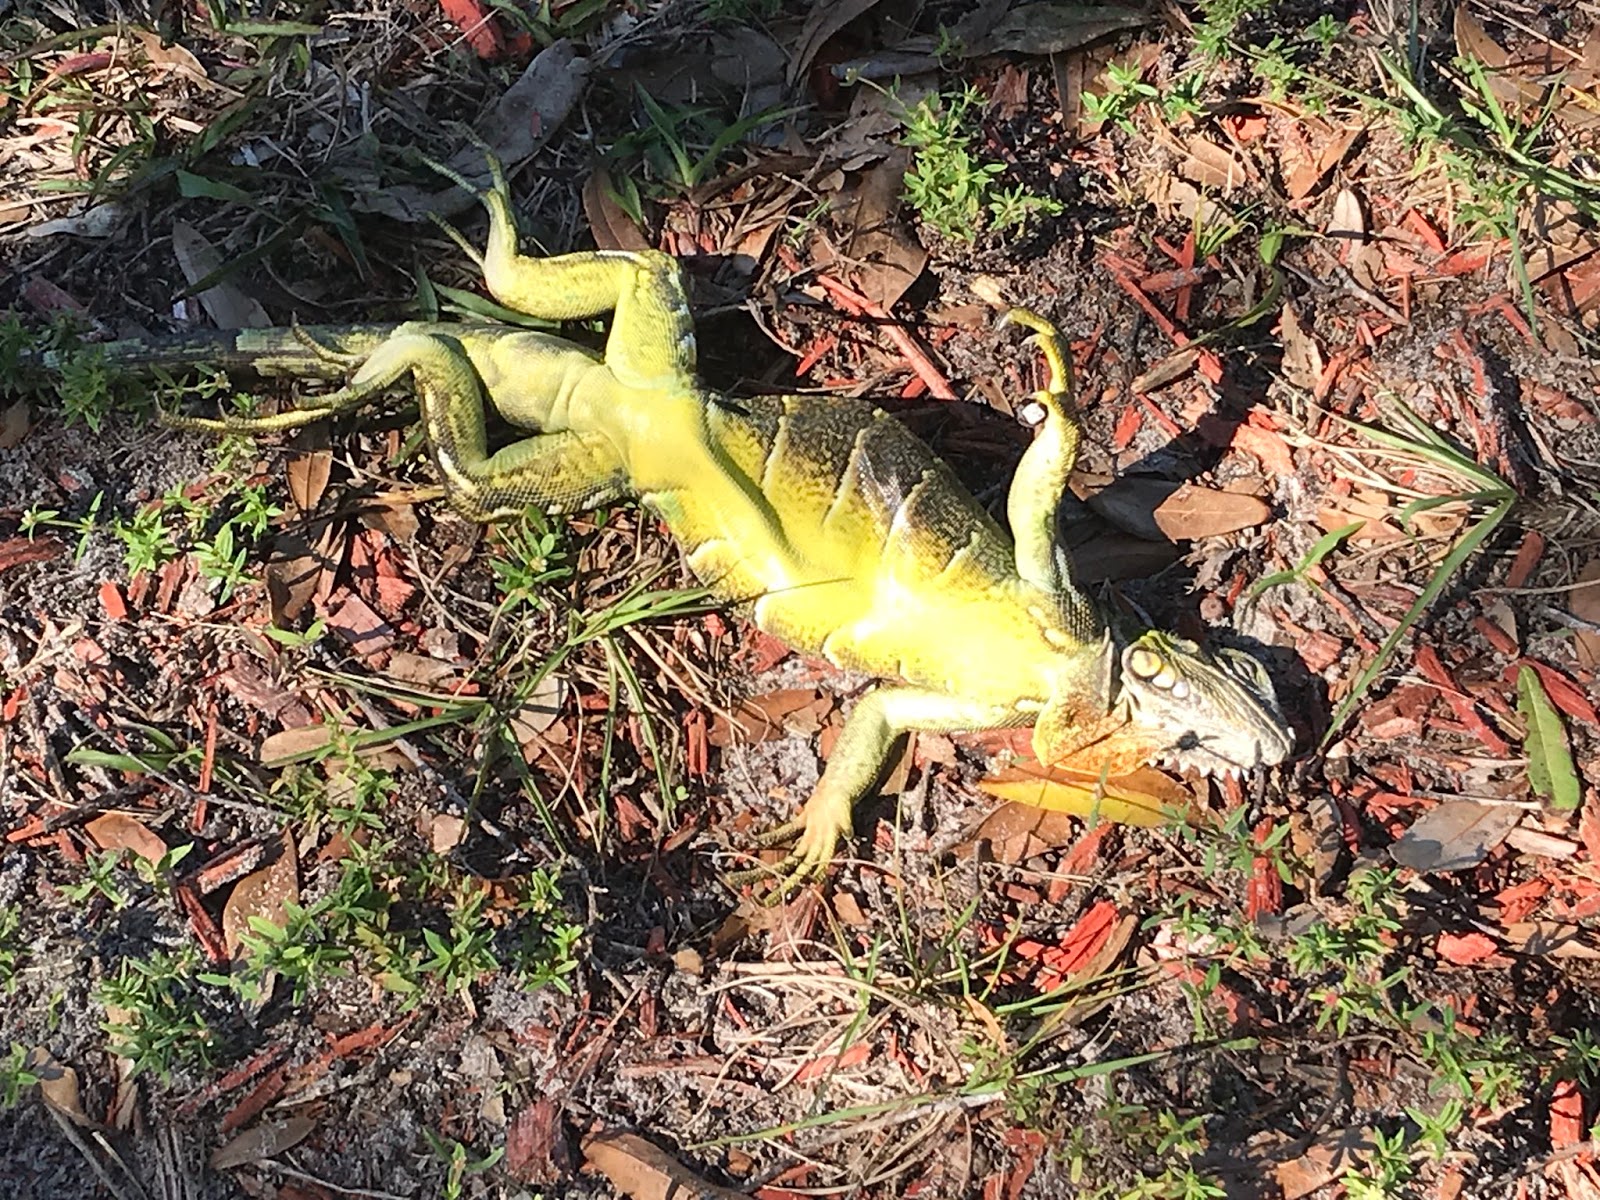 Frozen iguanas falling from trees during cold snap in Florida - USA NEWS1600 x 1200